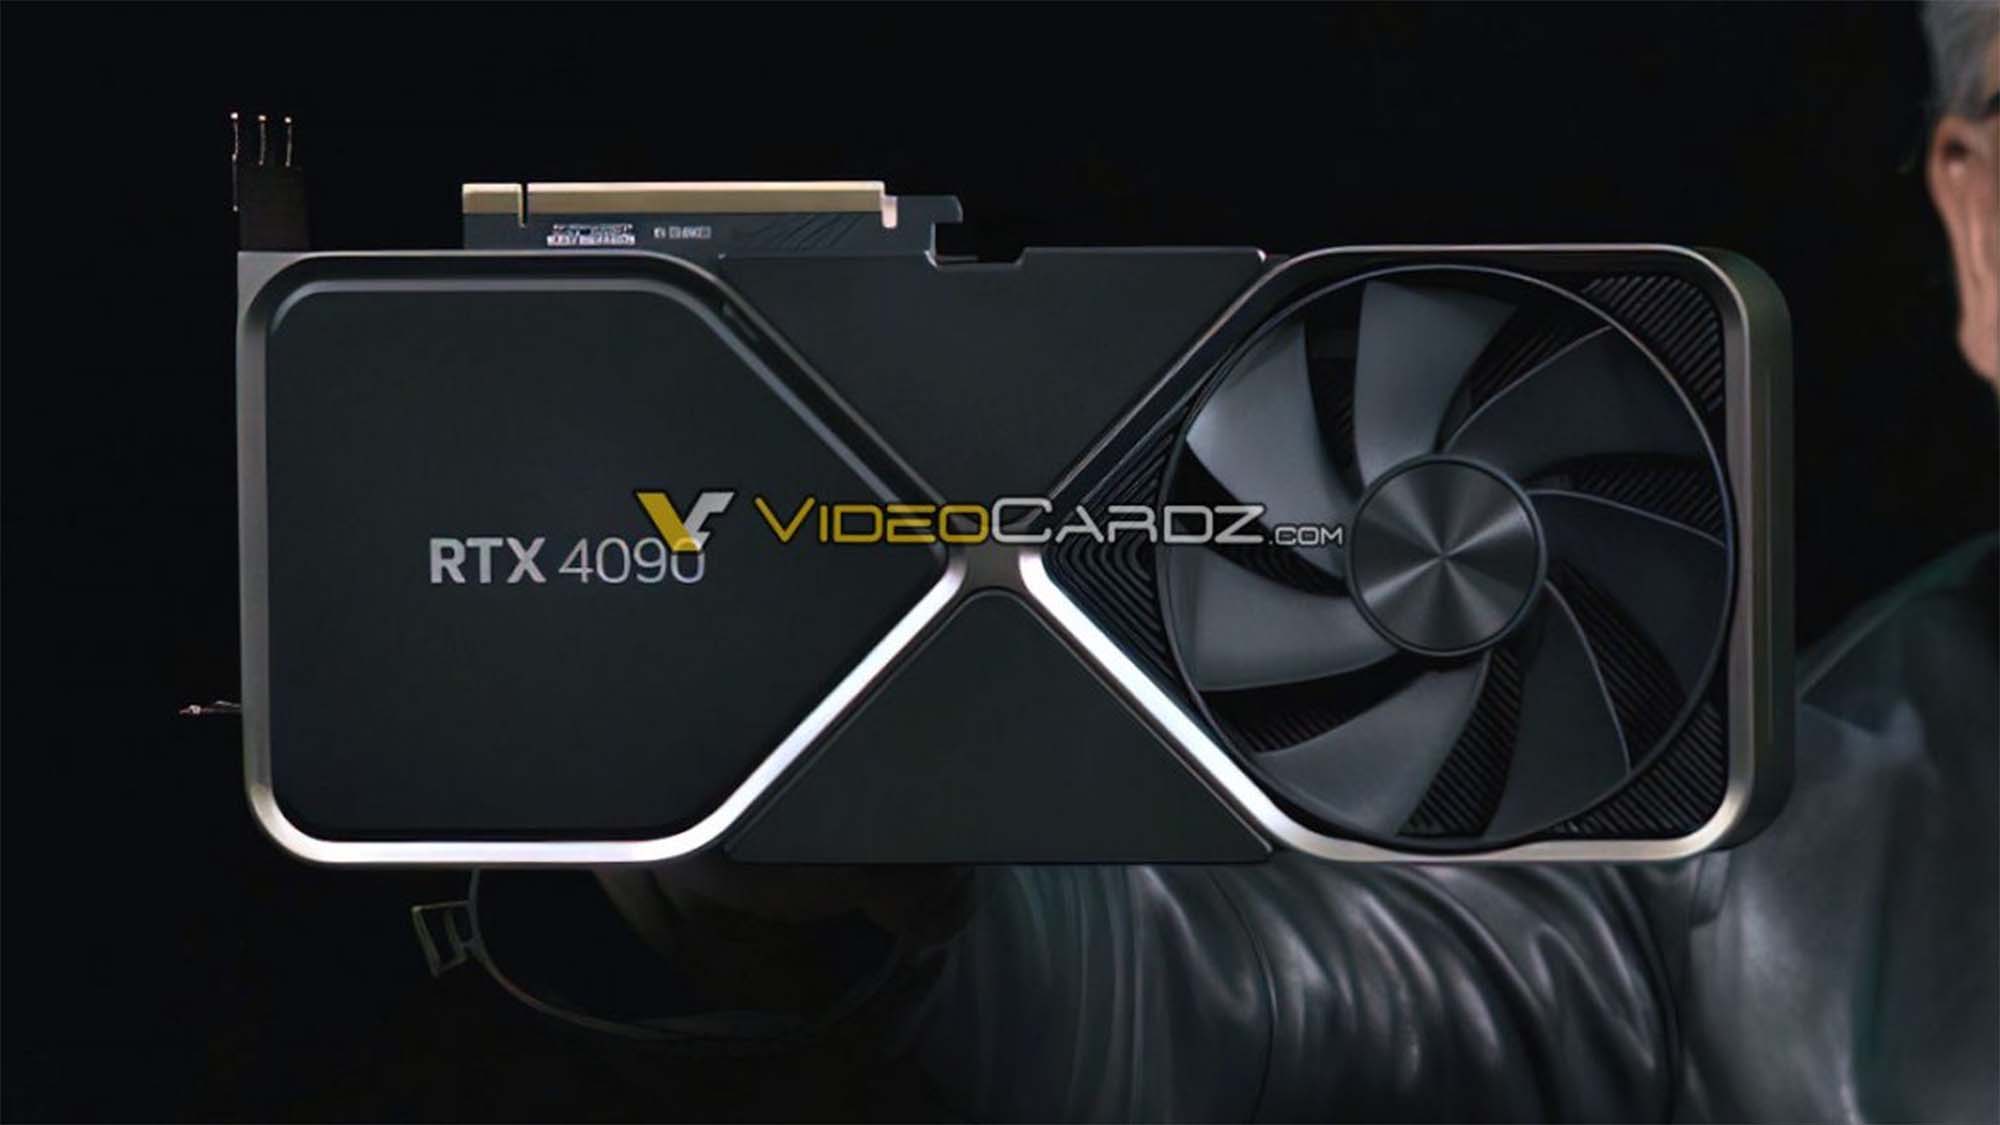 A fake image of the RTX 4090 graphics card